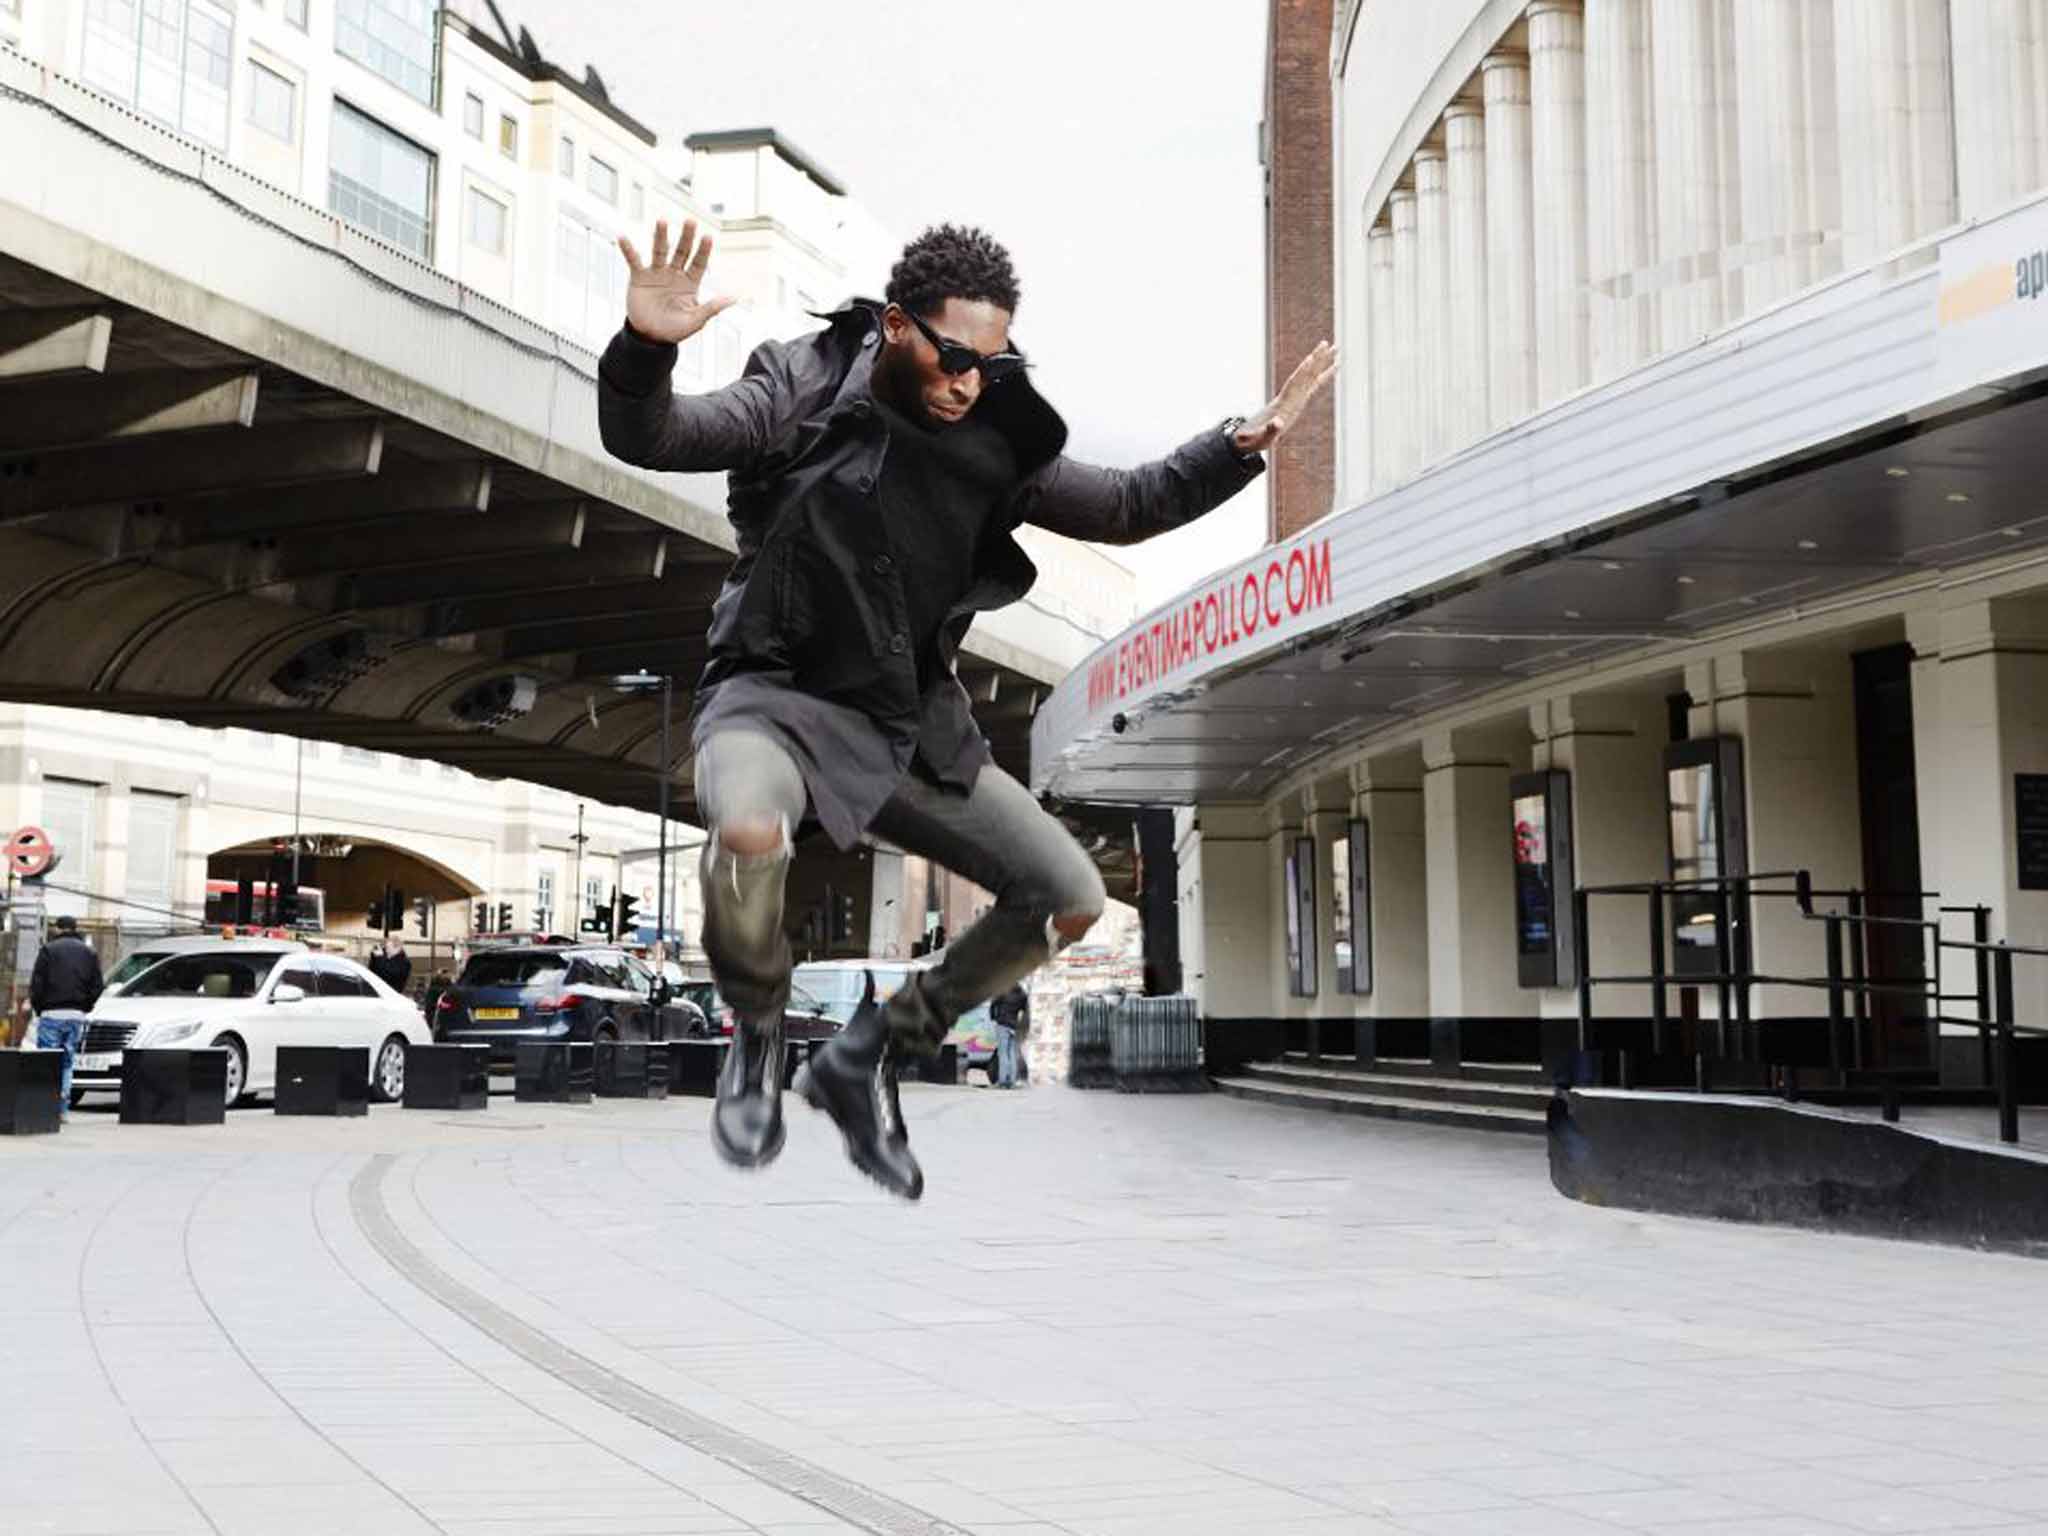 Tinie Tempah pays homage to some musical greats outside the Hammersmith Apollo, where he has played